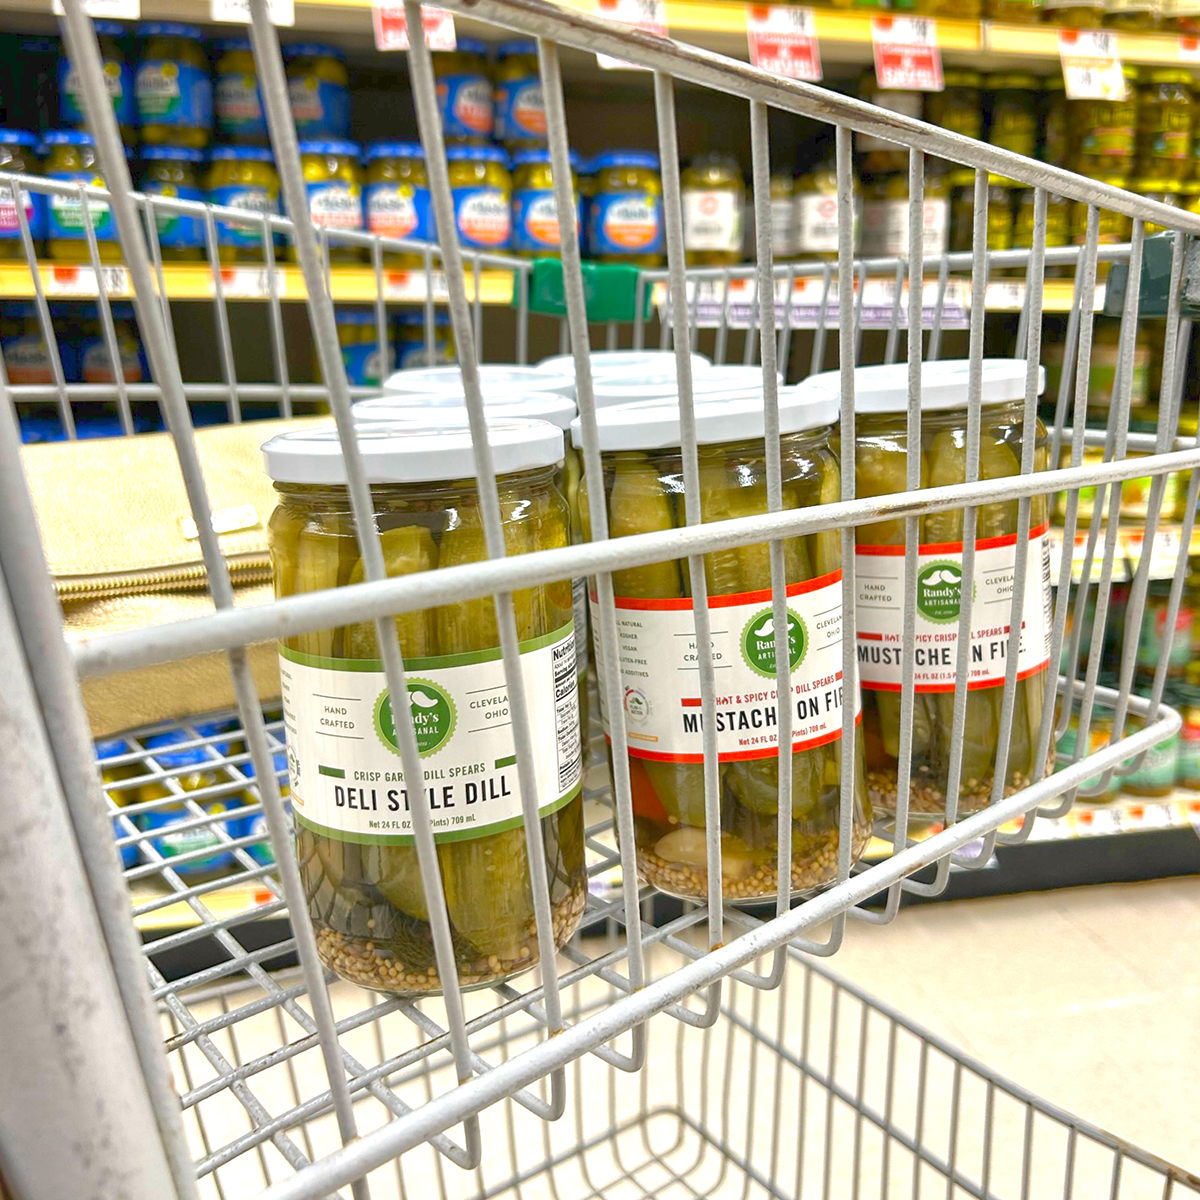 Hello #Massachusetts! We're 💪 to have our 🥒 on the @Roche_Bros shelves. 

Add us to your carts— you won't be disappointed!

#bostoneats #boston #RocheBros #bostonfoodie #gourmetpickles #artisanpickles #NonGMOProject